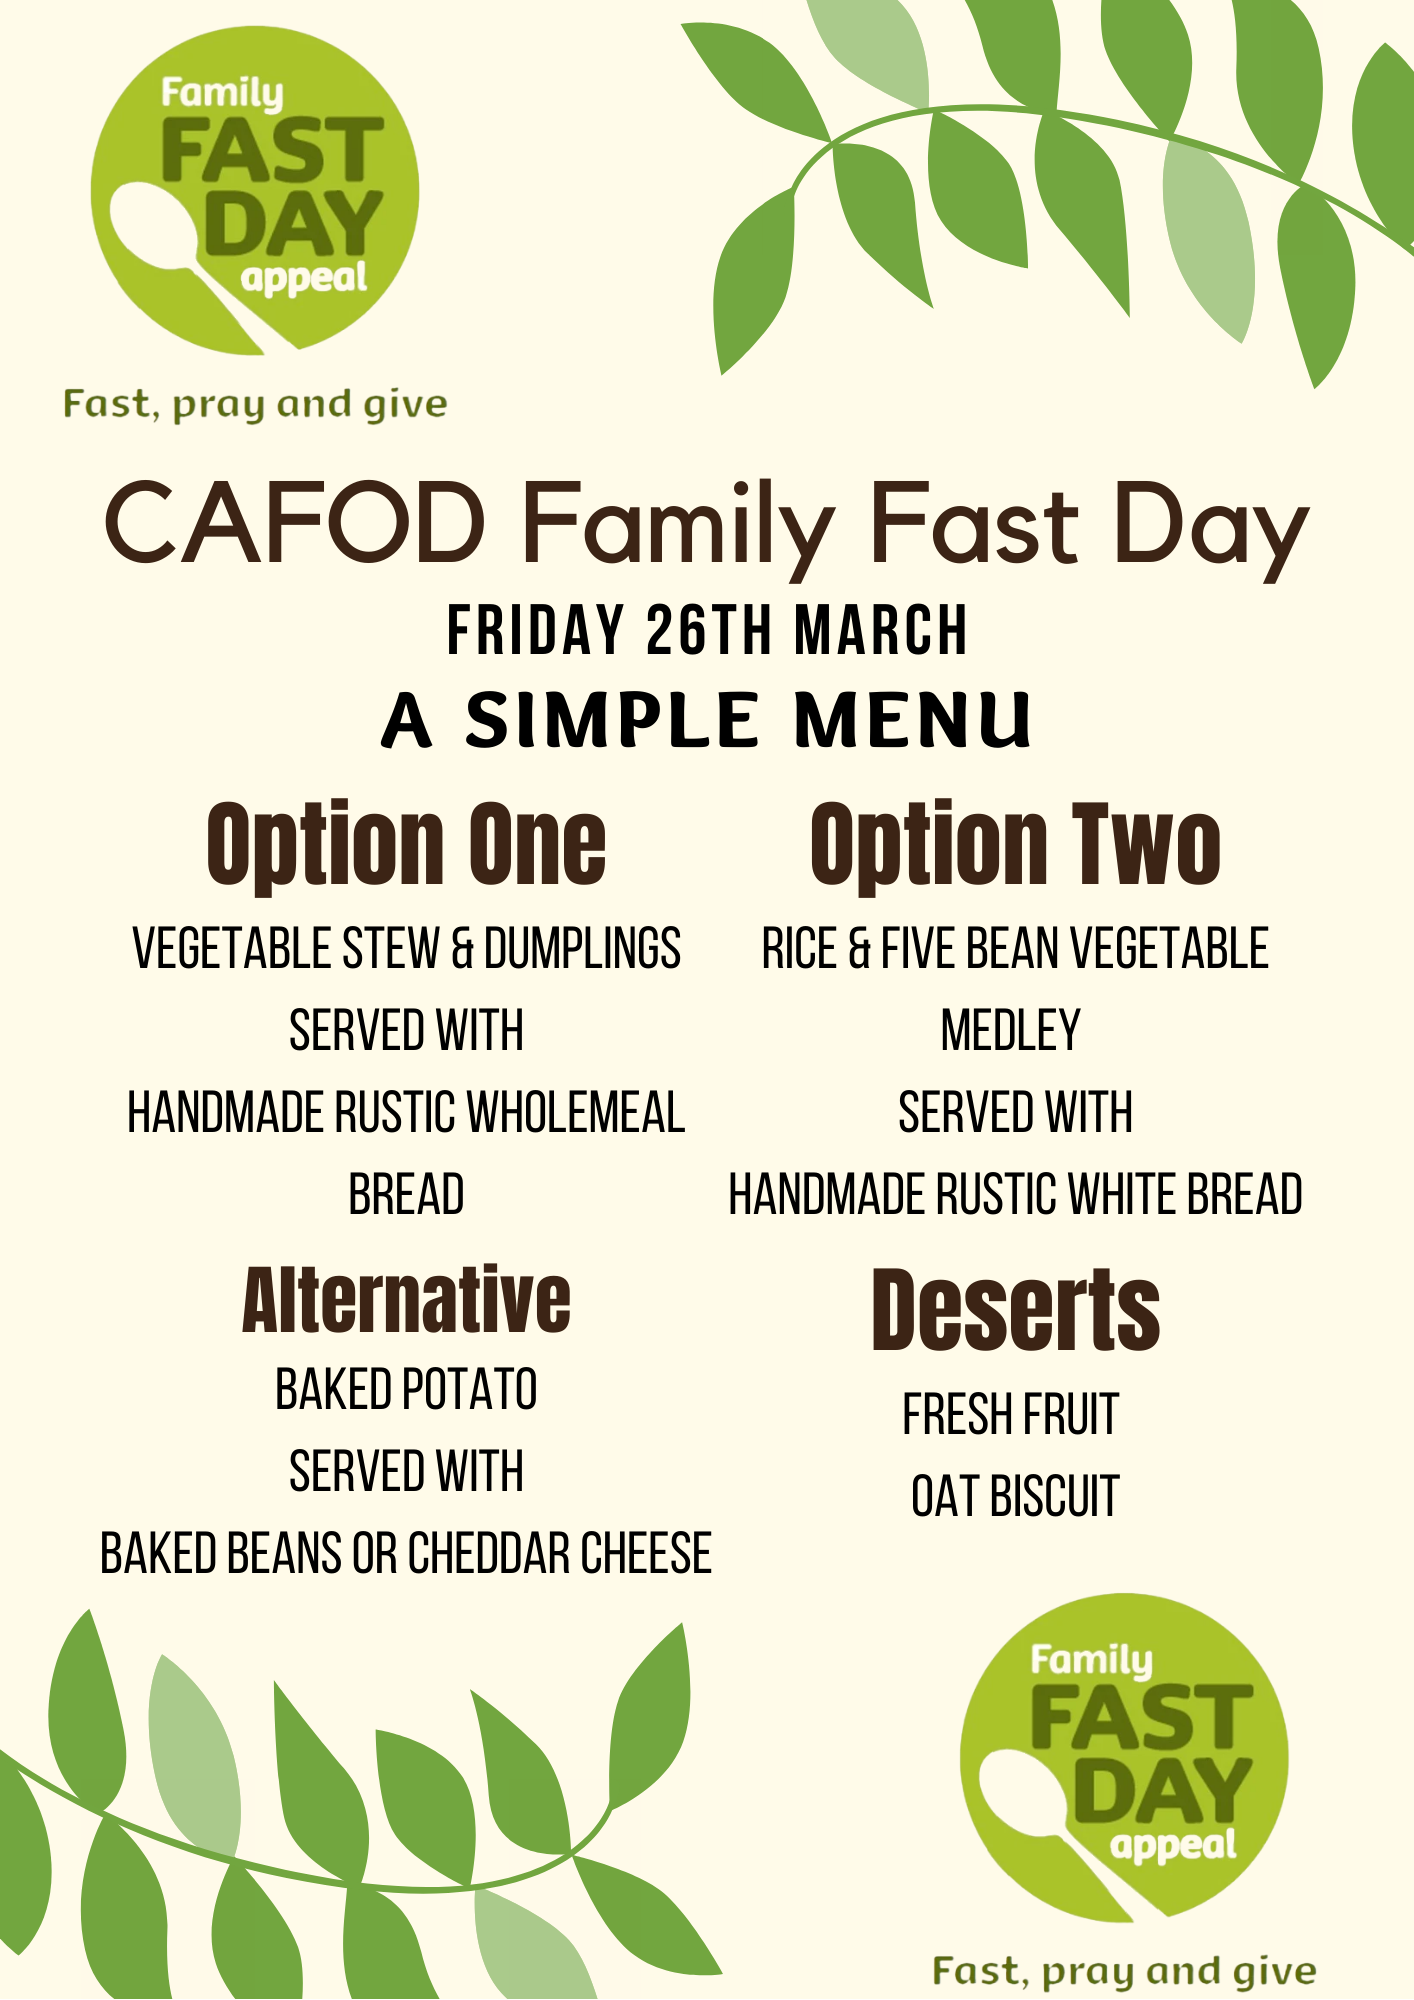 CAFOD Family Fast Day Friday 26 March 2021